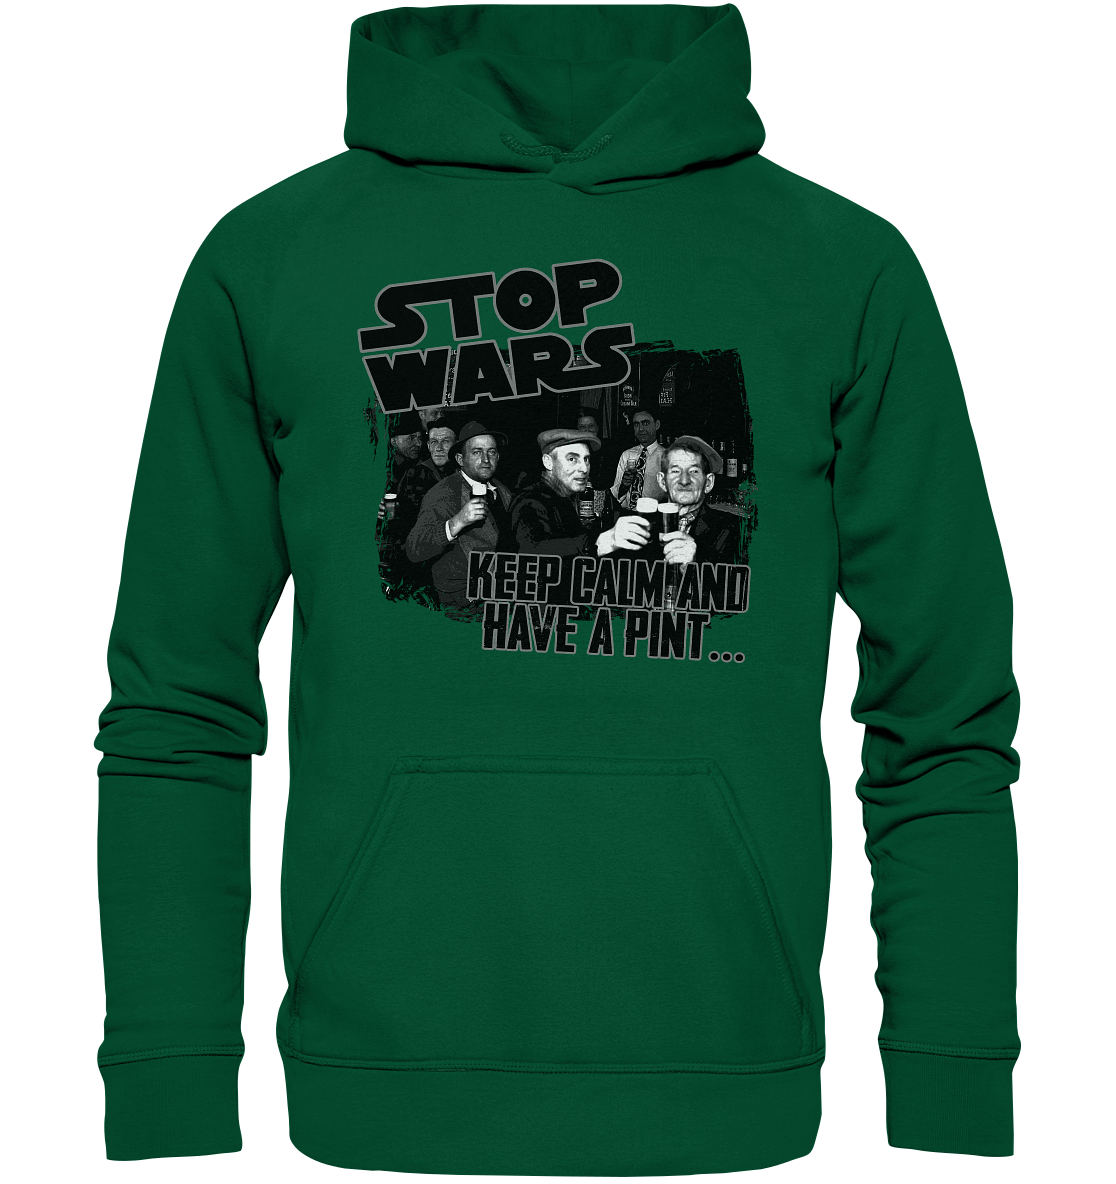 Stop Wars "Keep Calm And Have A Pint" - Basic Unisex Hoodie